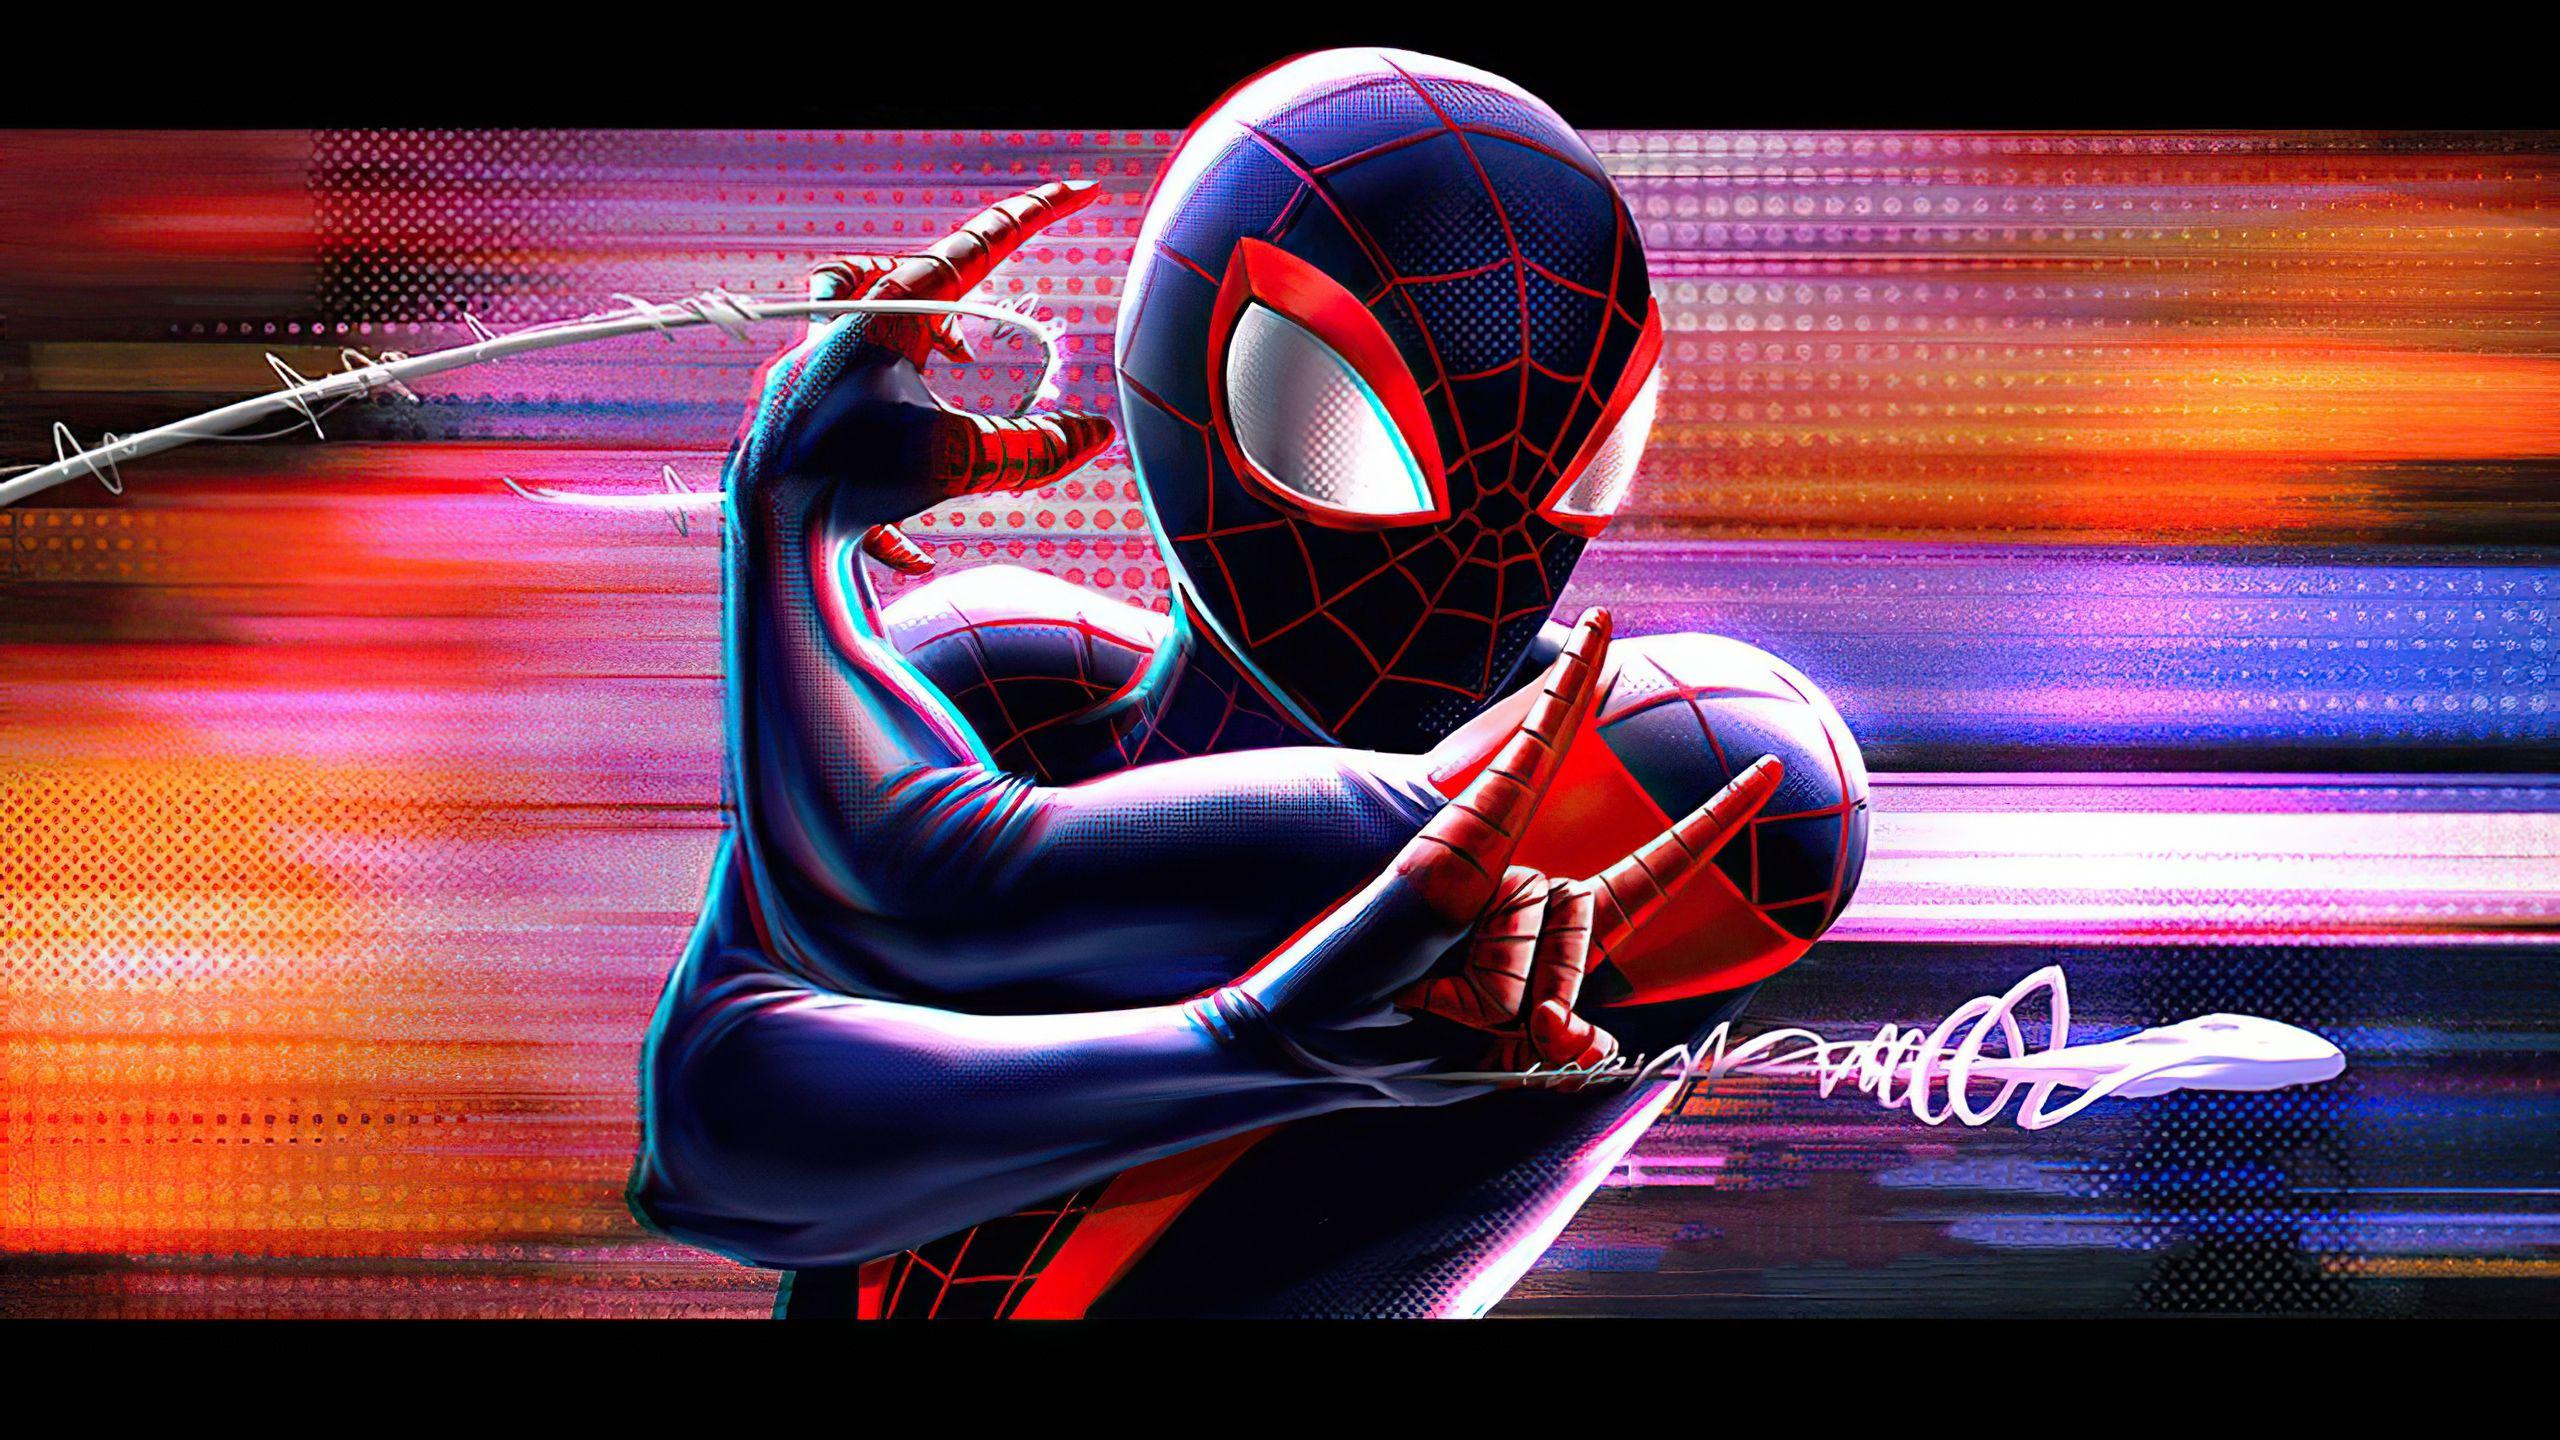 2560 x 1440 · jpeg - Spider-Man Web Shooters Wallpapers - Wallpaper Cave